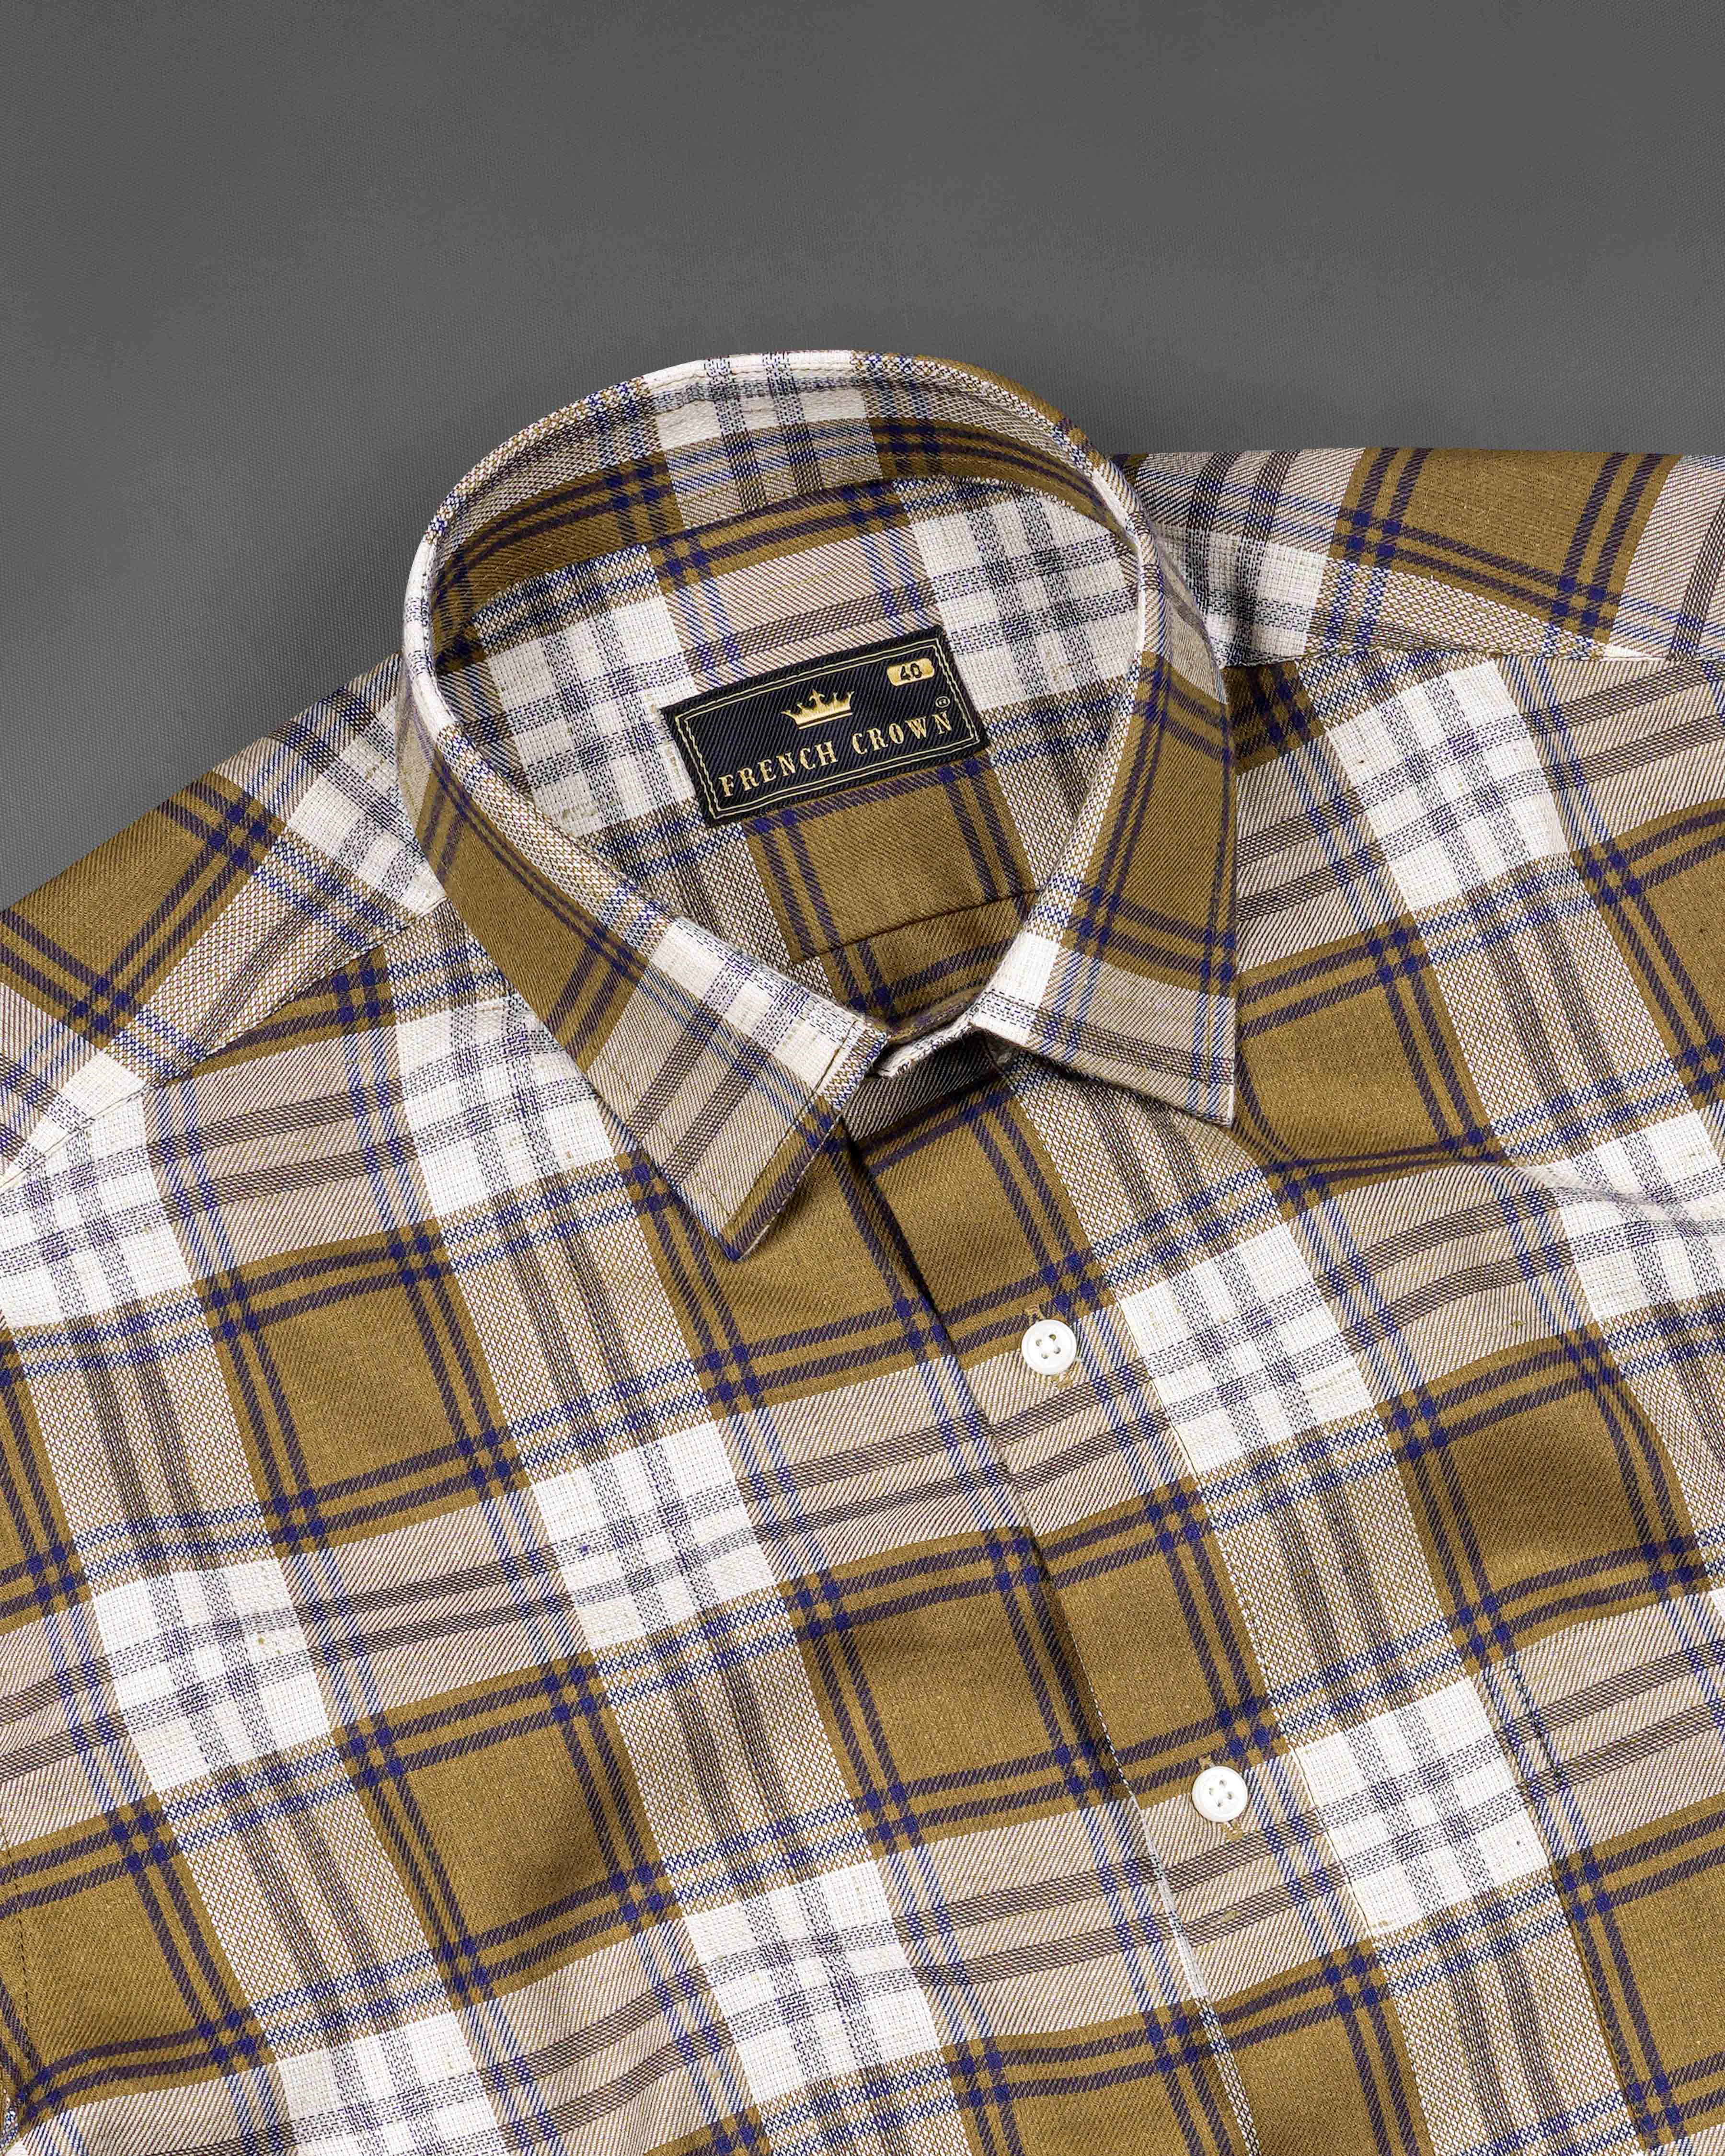 Old Copper Brown with Bunting Blue Twill Plaid Premium Cotton Shirt 8277-38, 8277-H-38, 8277-39, 8277-H-39, 8277-40, 8277-H-40, 8277-42, 8277-H-42, 8277-44, 8277-H-44, 8277-46, 8277-H-46, 8277-48, 8277-H-48, 8277-50, 8277-H-50, 8277-52, 8277-H-52